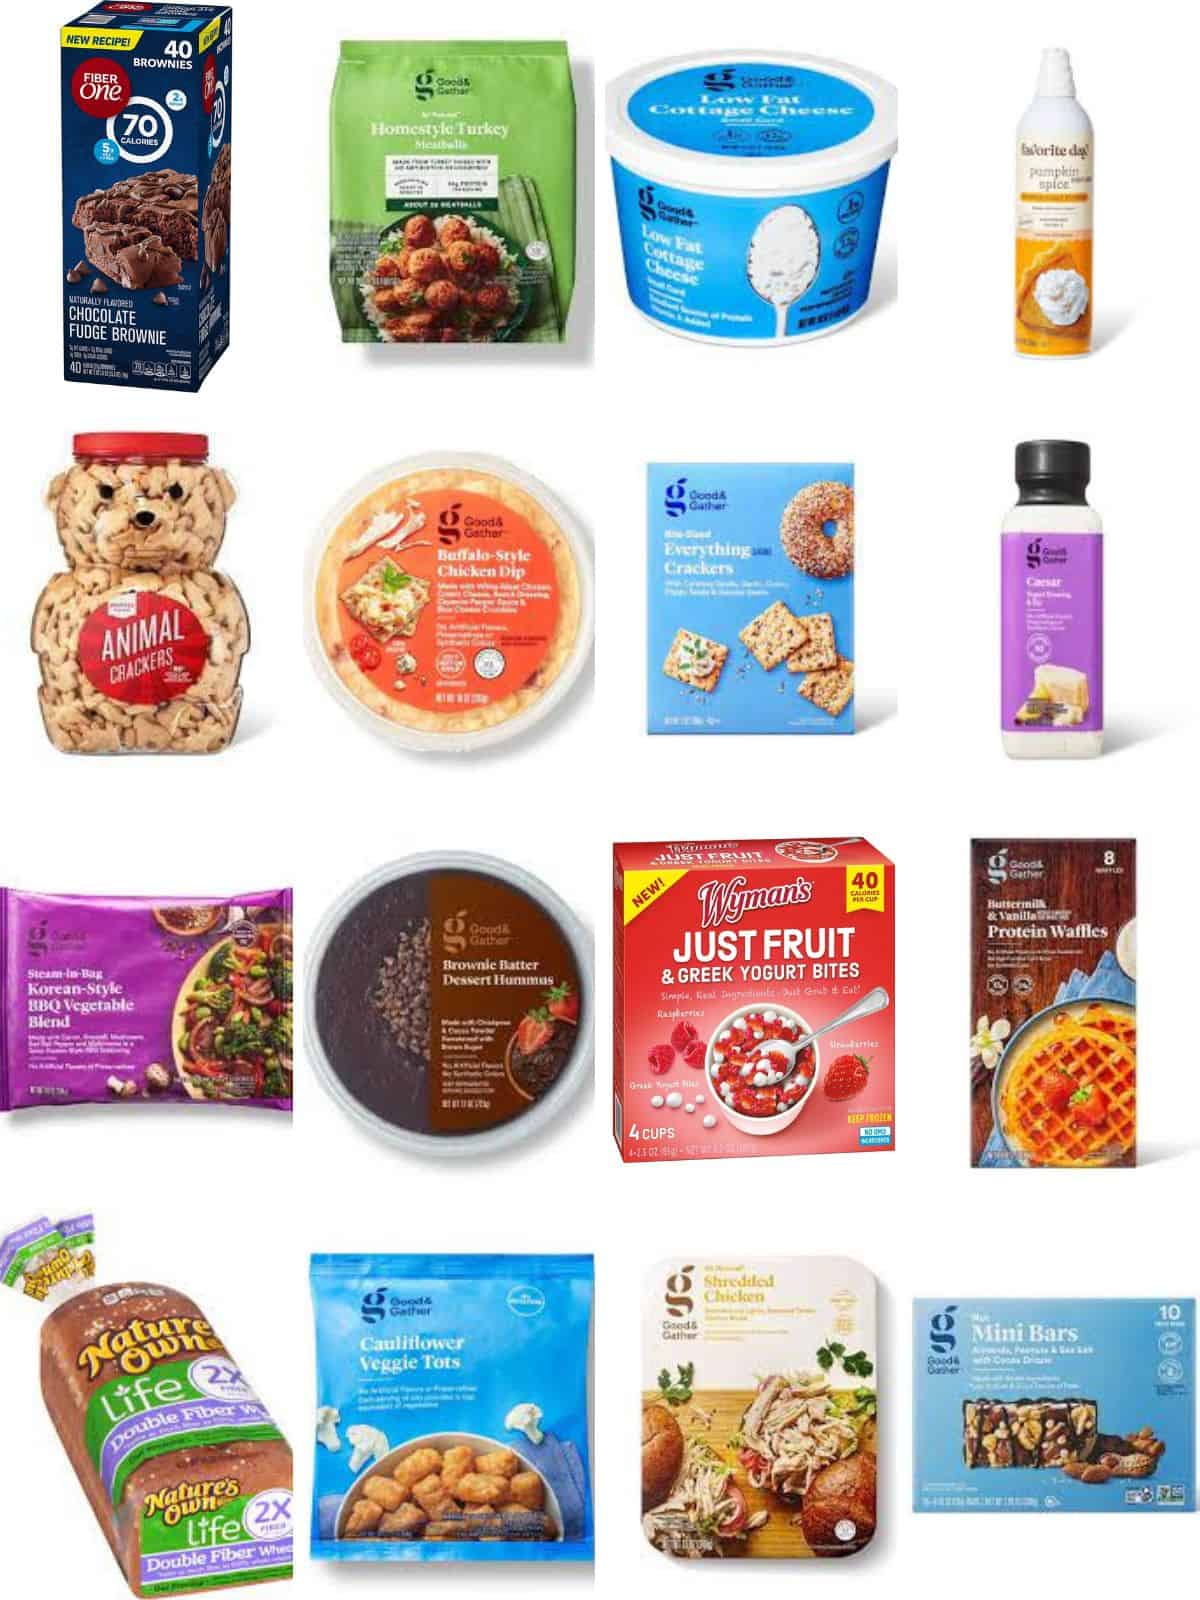 A selection of foods suitable from Weight Watchers from Target.